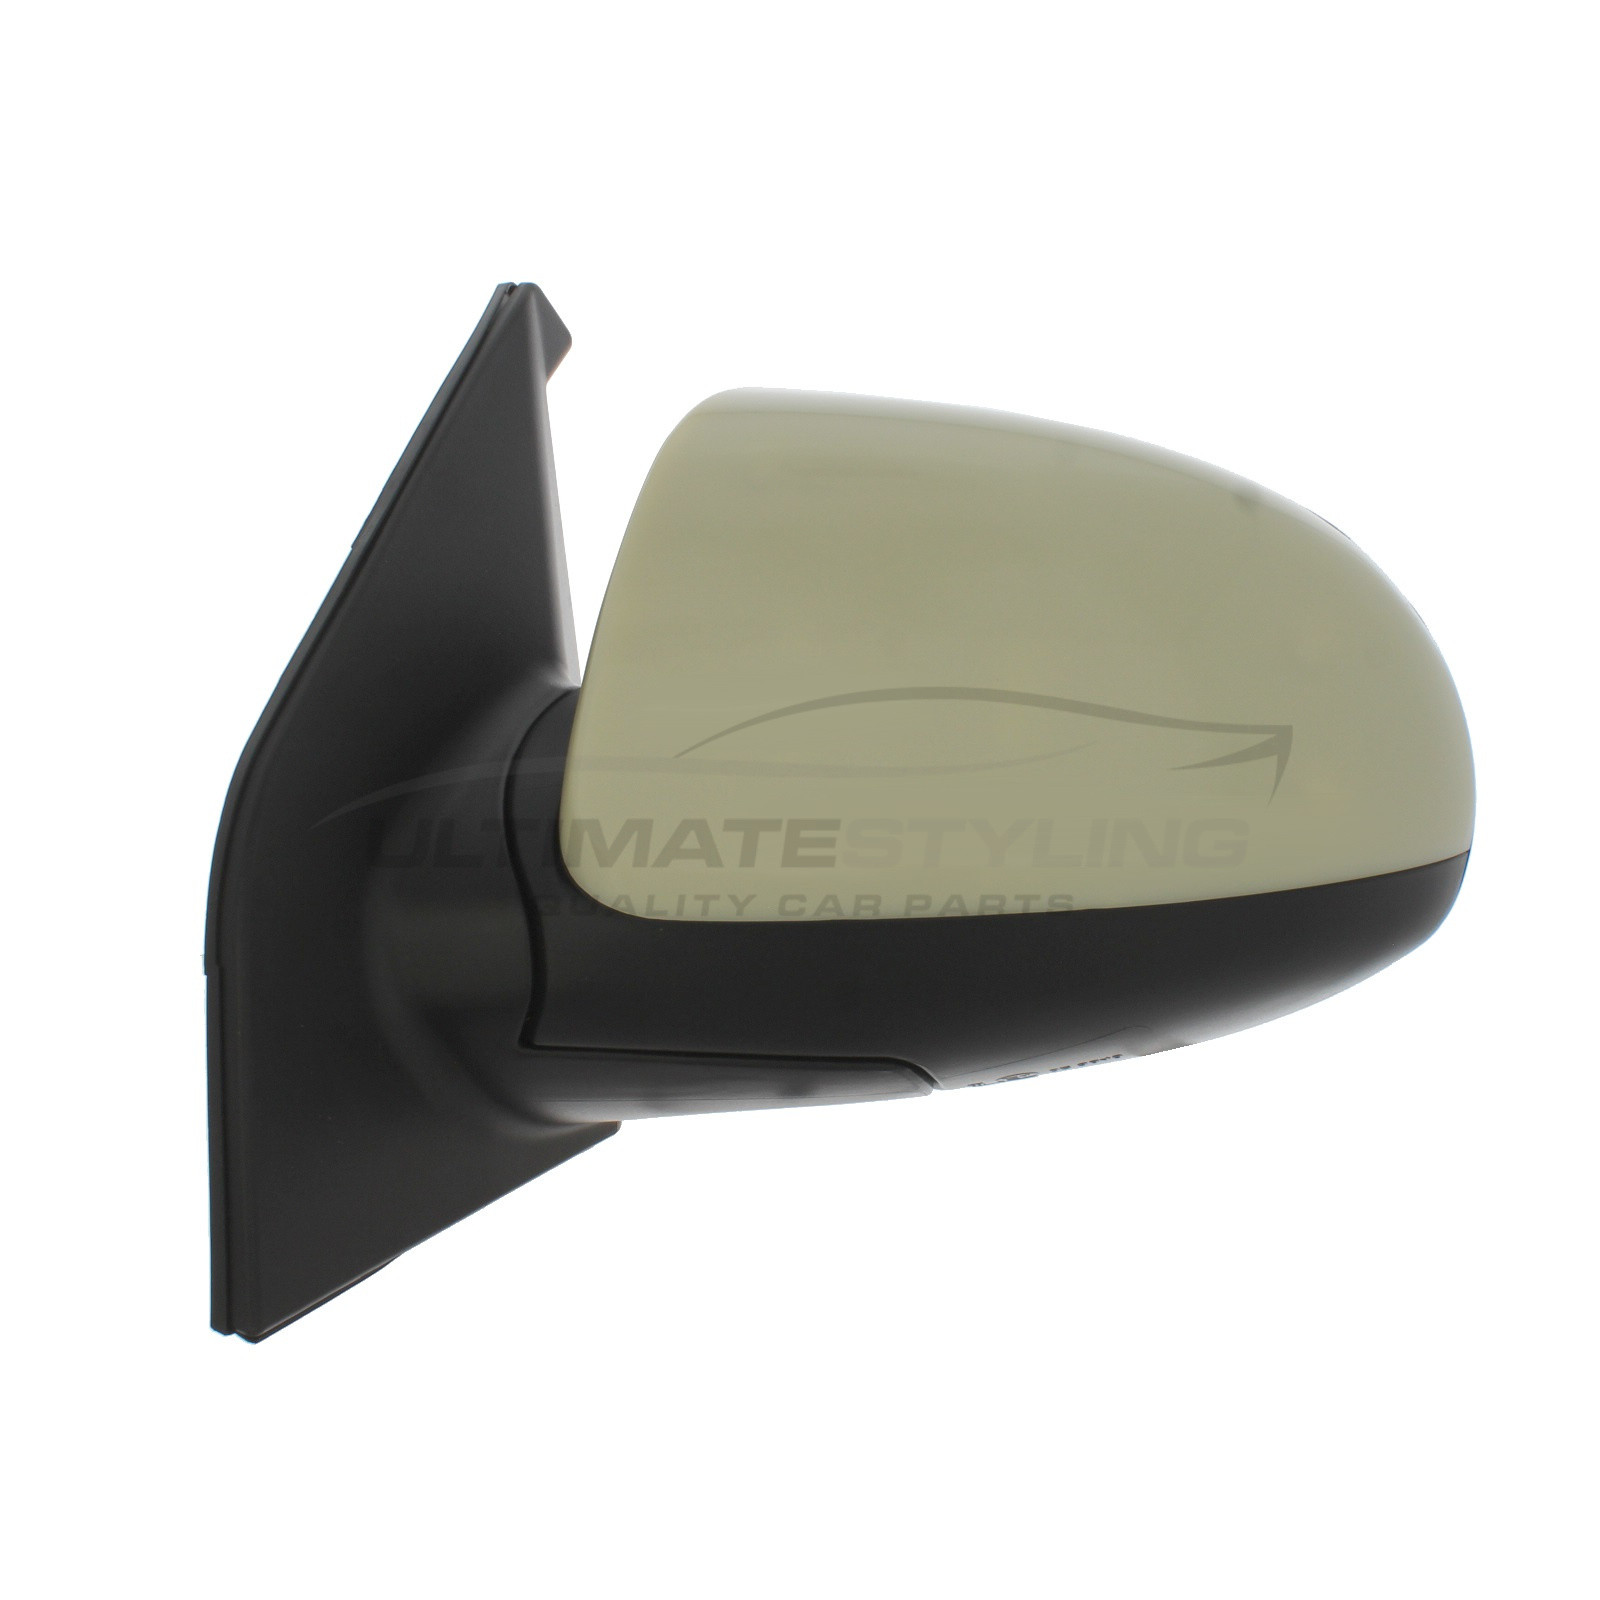 Kia Picanto Wing Mirror / Door Mirror - Passenger Side (LH) - Cable adjustment - Non-Heated Glass - Primed